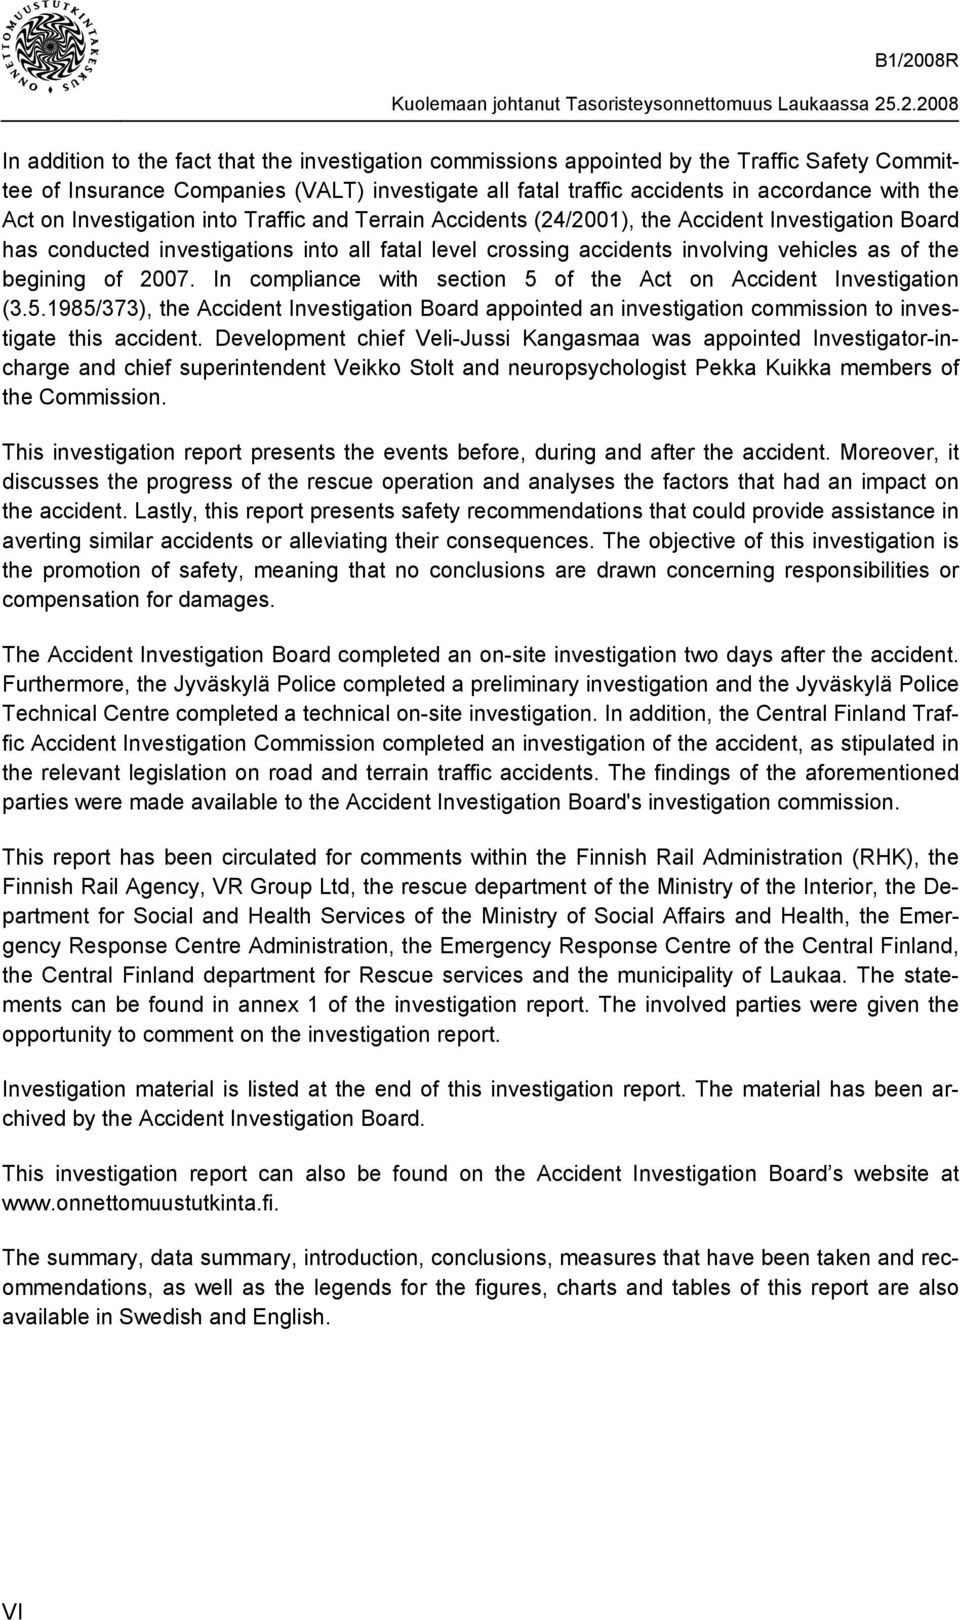 begining of 2007. In compliance with section 5 of the Act on Accident Investigation (3.5.1985/373), the Accident Investigation Board appointed an investigation commission to investigate this accident.